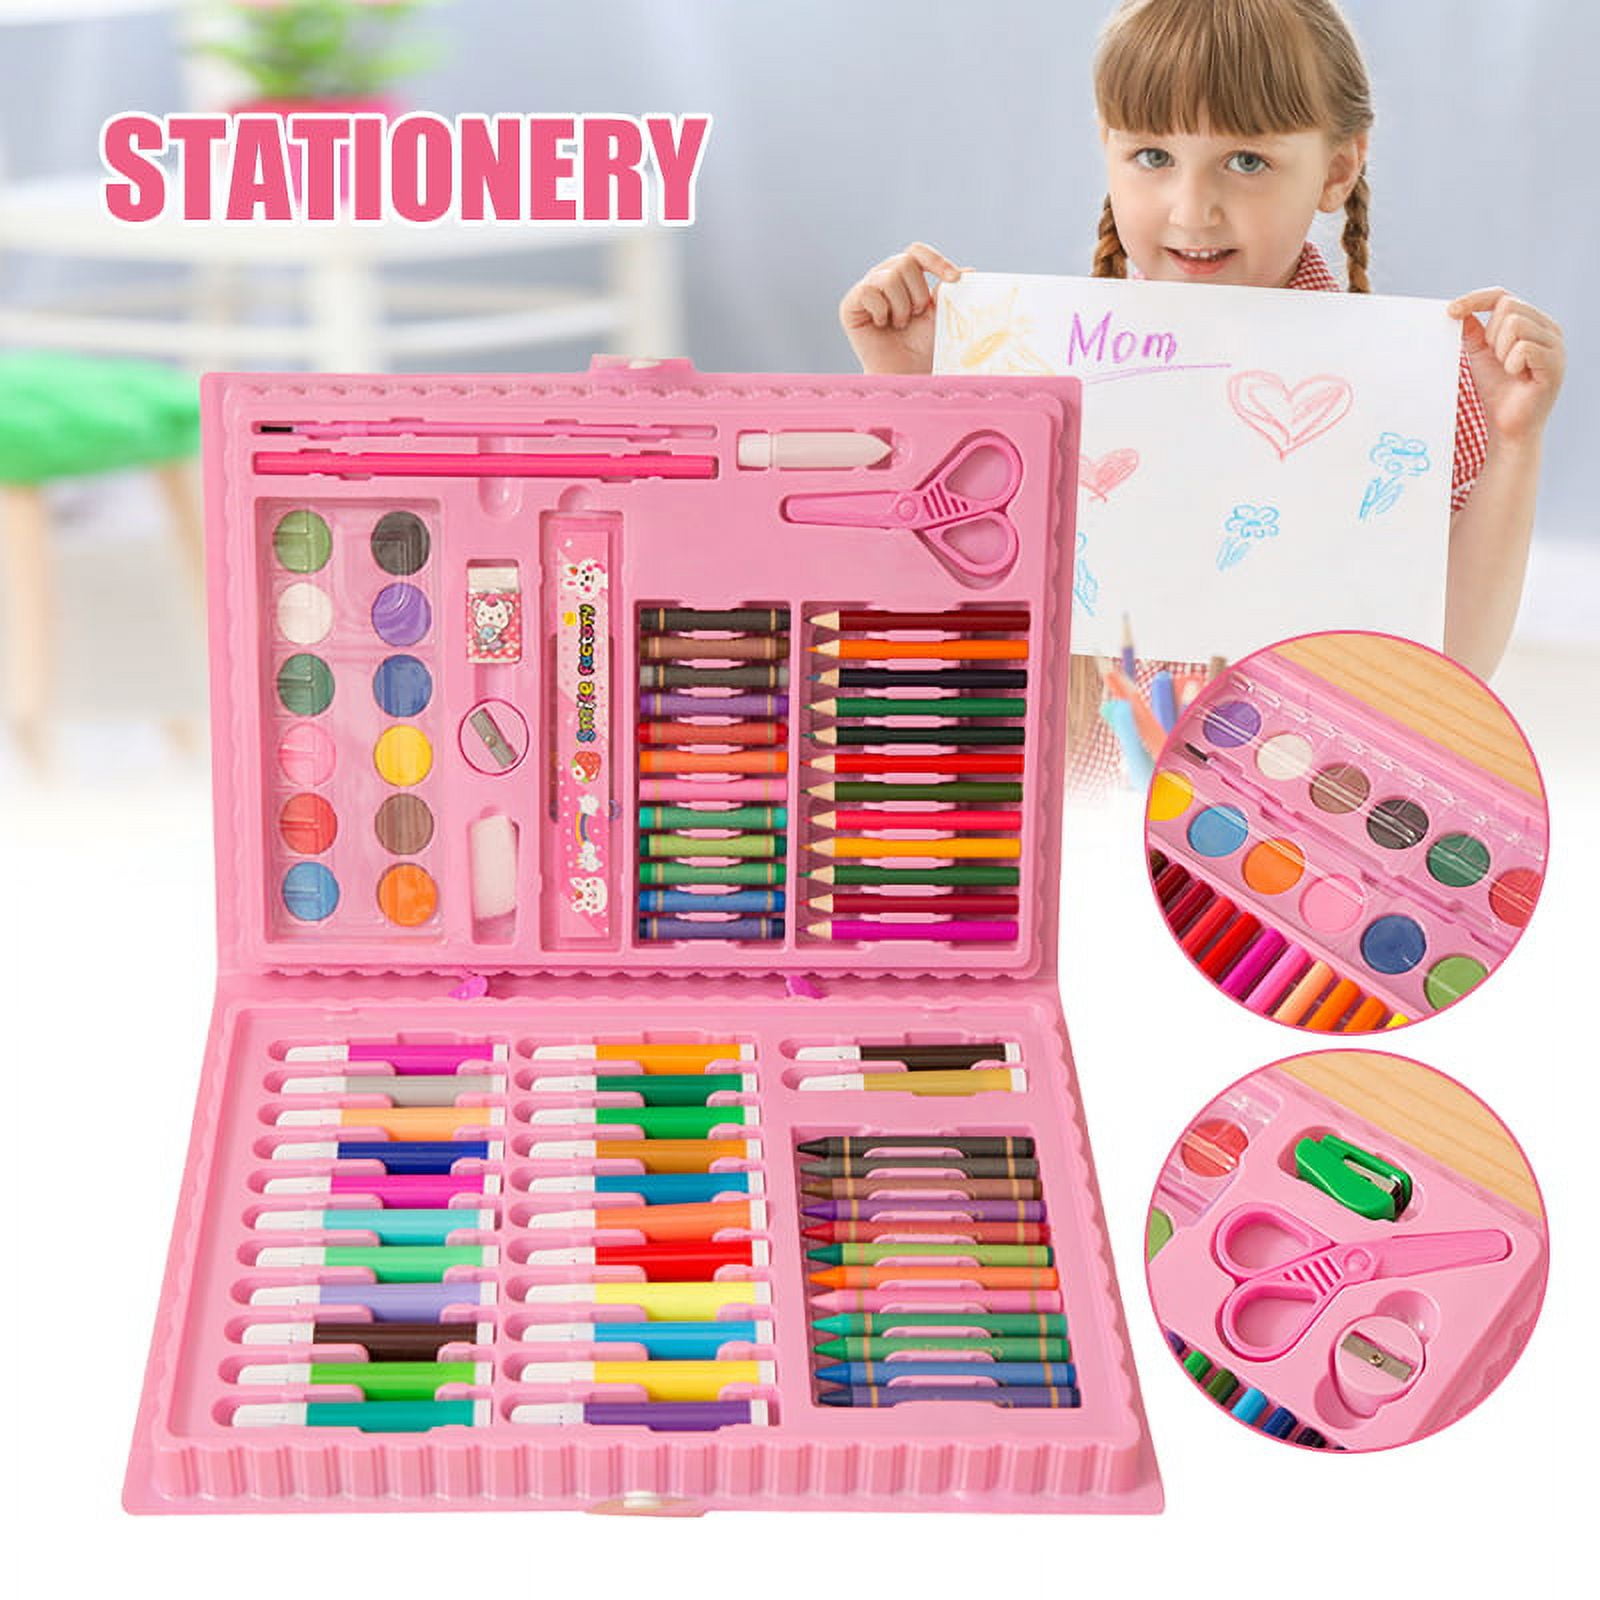 Wholesale Kids Paint Box Set 50 Mix, Educational Paint Bucket Drawing Kit  For Painting And Art With DIY Brushes From Dhtradeguide, $0.71